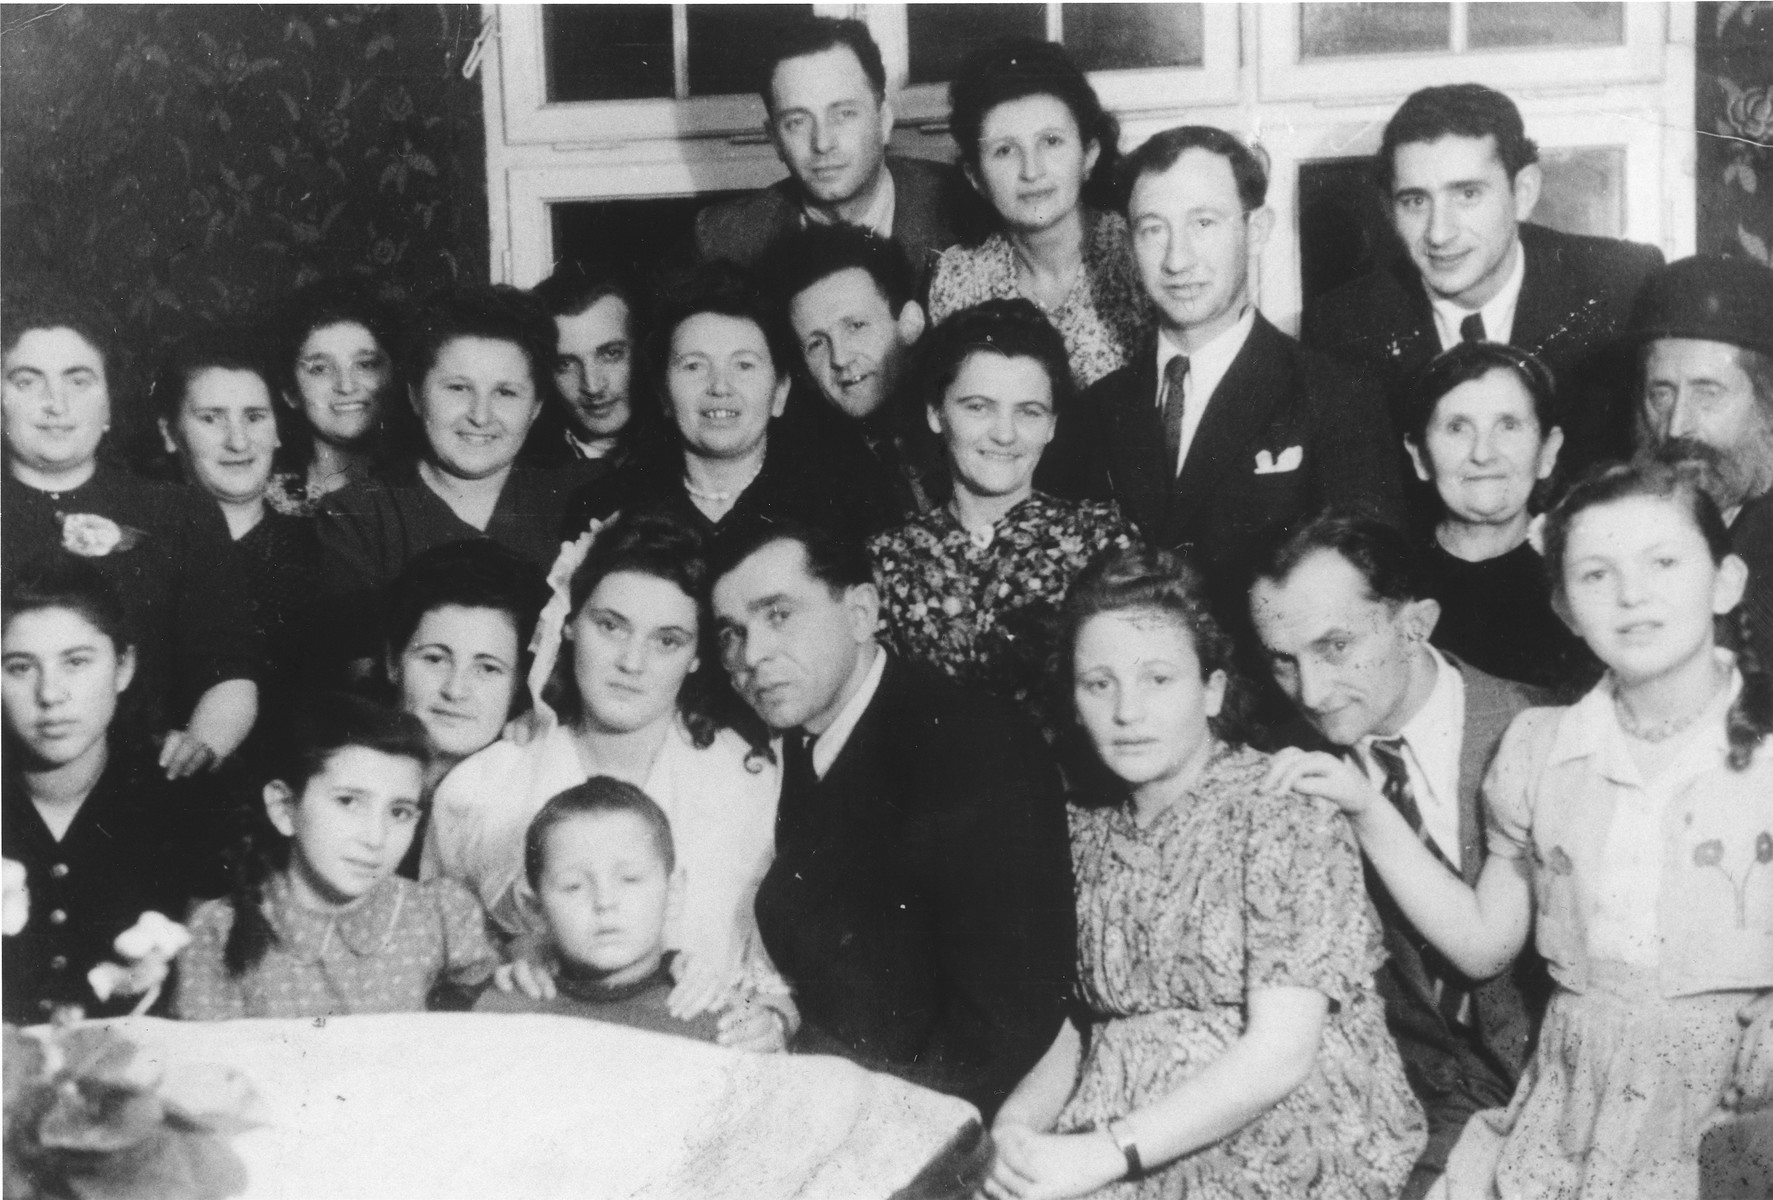 Group portrait of family and friends at the first wedding in the Ulm displaced persons camp. The bride and groom are Dzunia and Joe (Yitchak) (Itche) Storch. 

Also pictured from right to left n the front row are: Lila Rajs, Meyer Fenig and Bina (Rajs) Fenig.  Chuma (Rajs) Fruchter is seated next to the bride on the left.  Directly behind the bride is Chaja Rajs.  To the right of Chaja are Hershel Rajs and Roshi (Rajs) Binder.  Behind them are Moishe Binder and Moishe Fruchter.